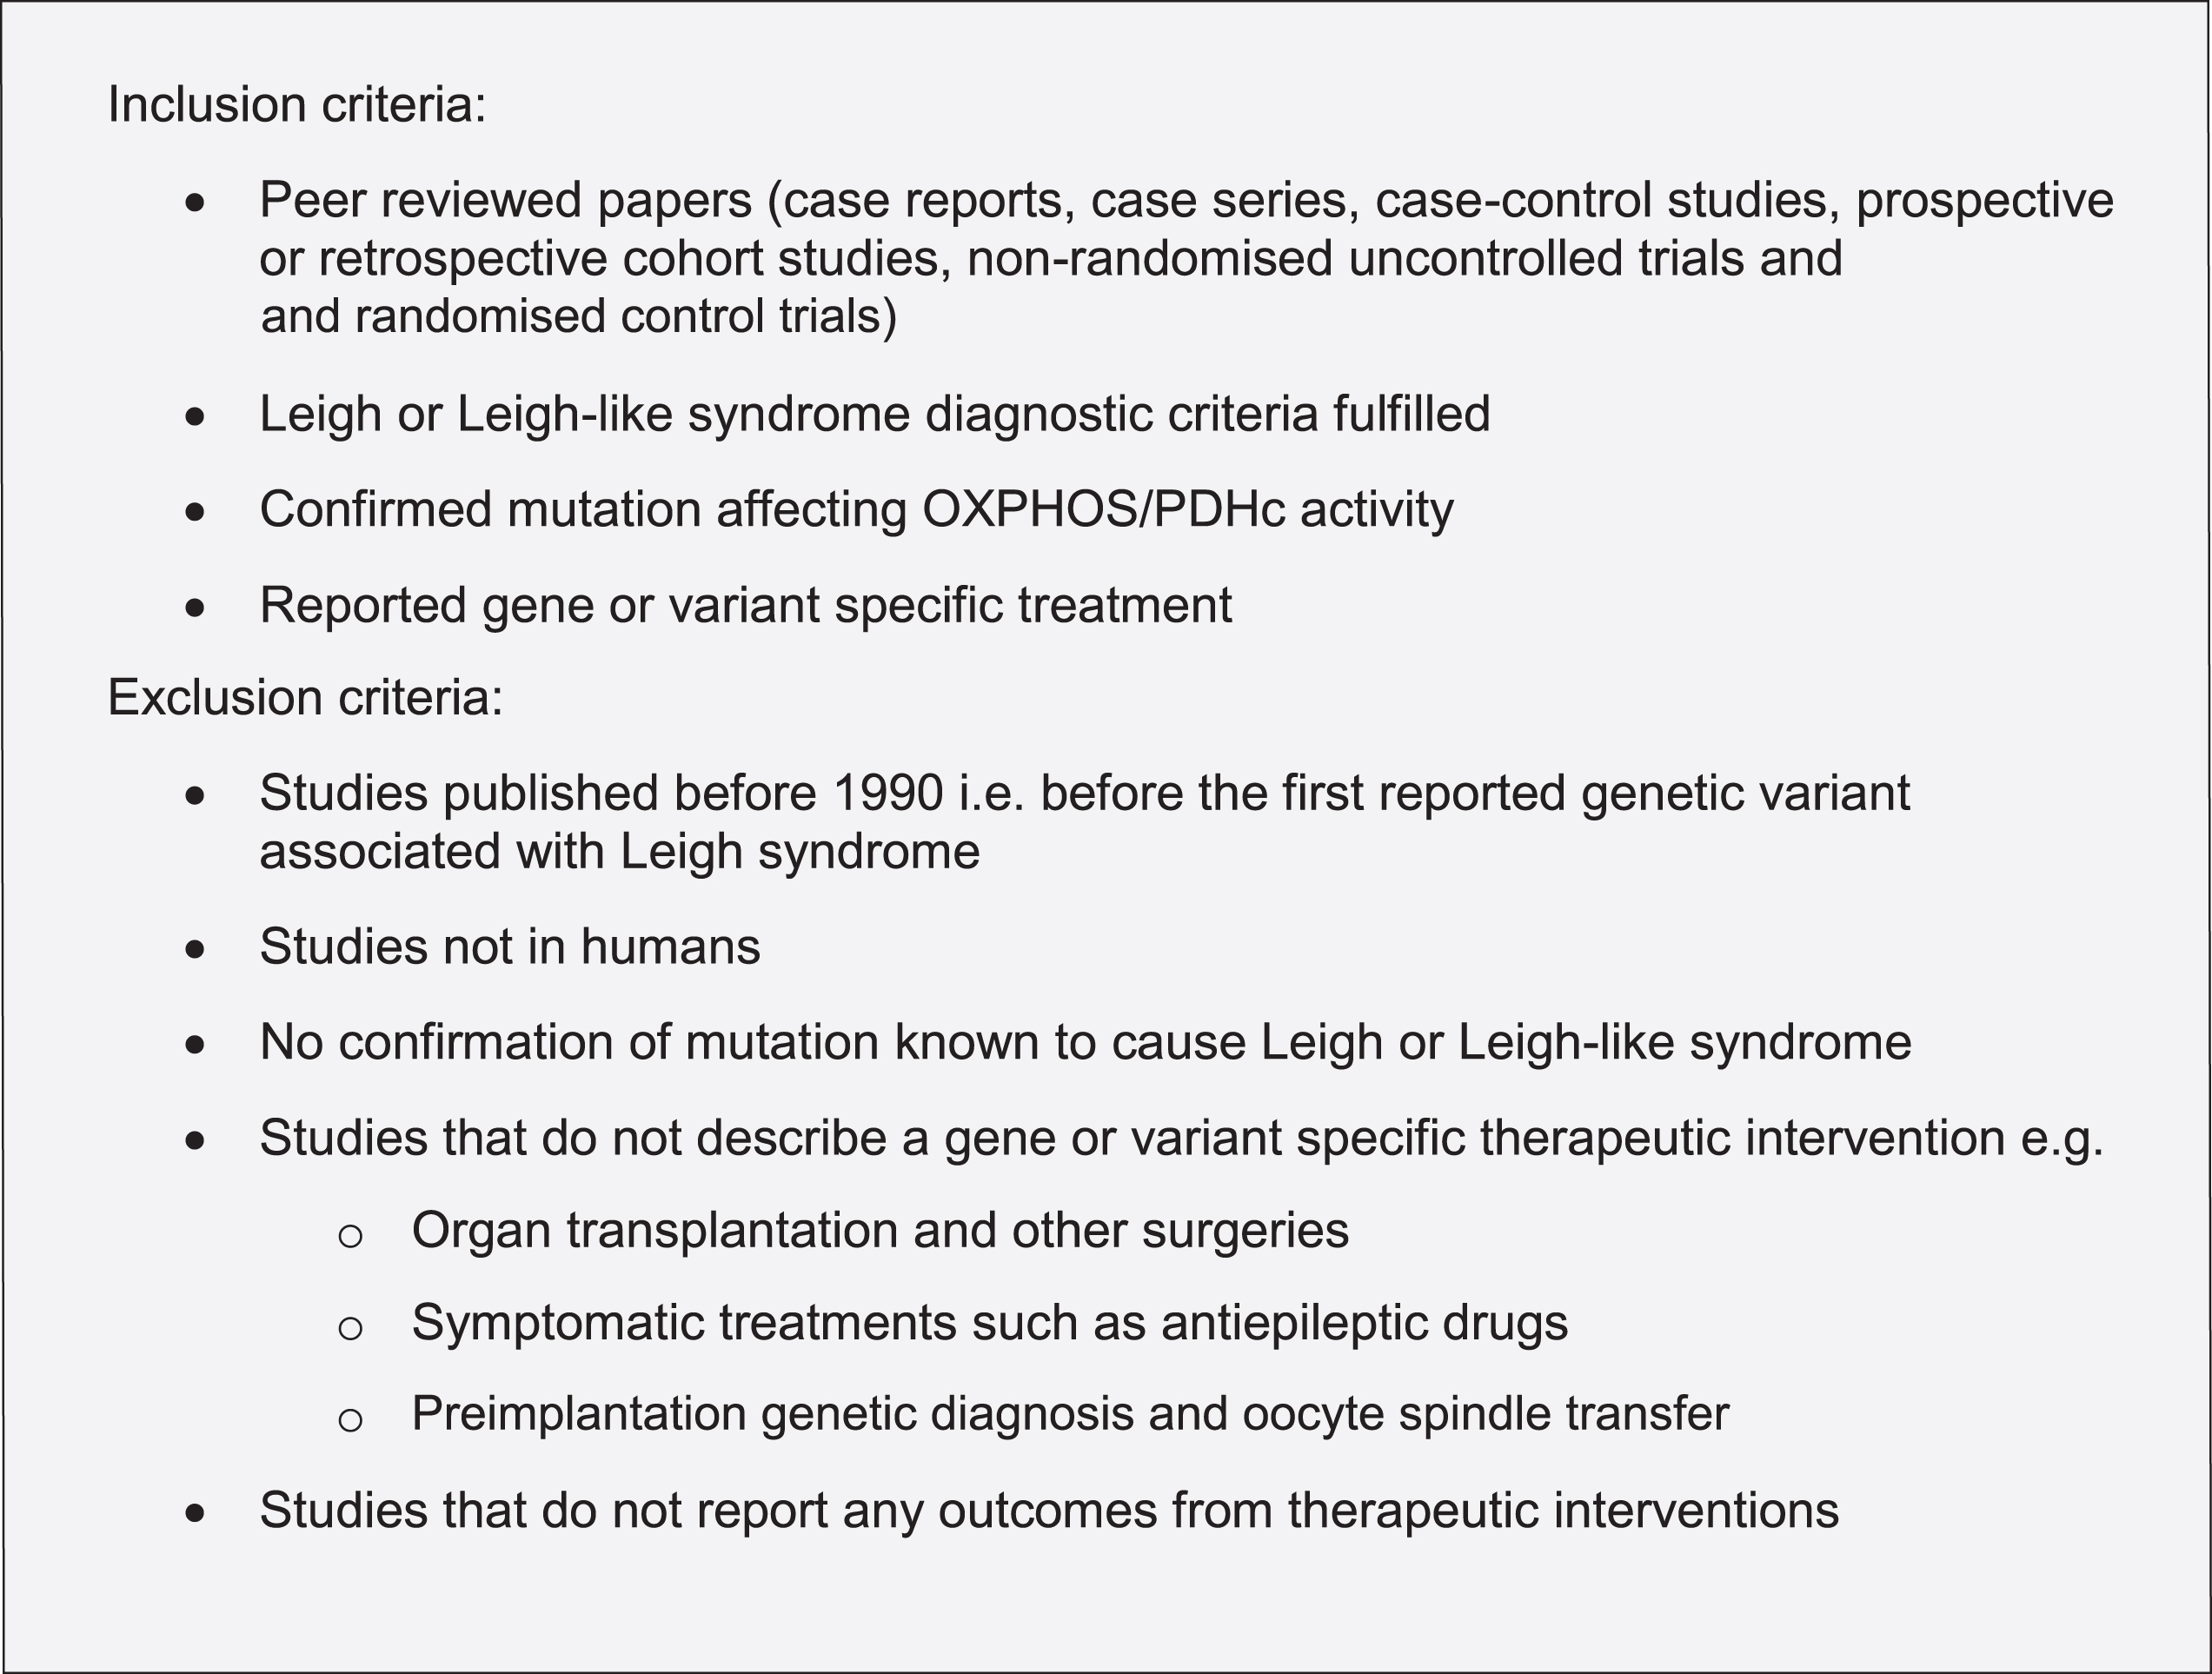 Inclusion and exclusion criteria for screening Leigh syndrome treatments.